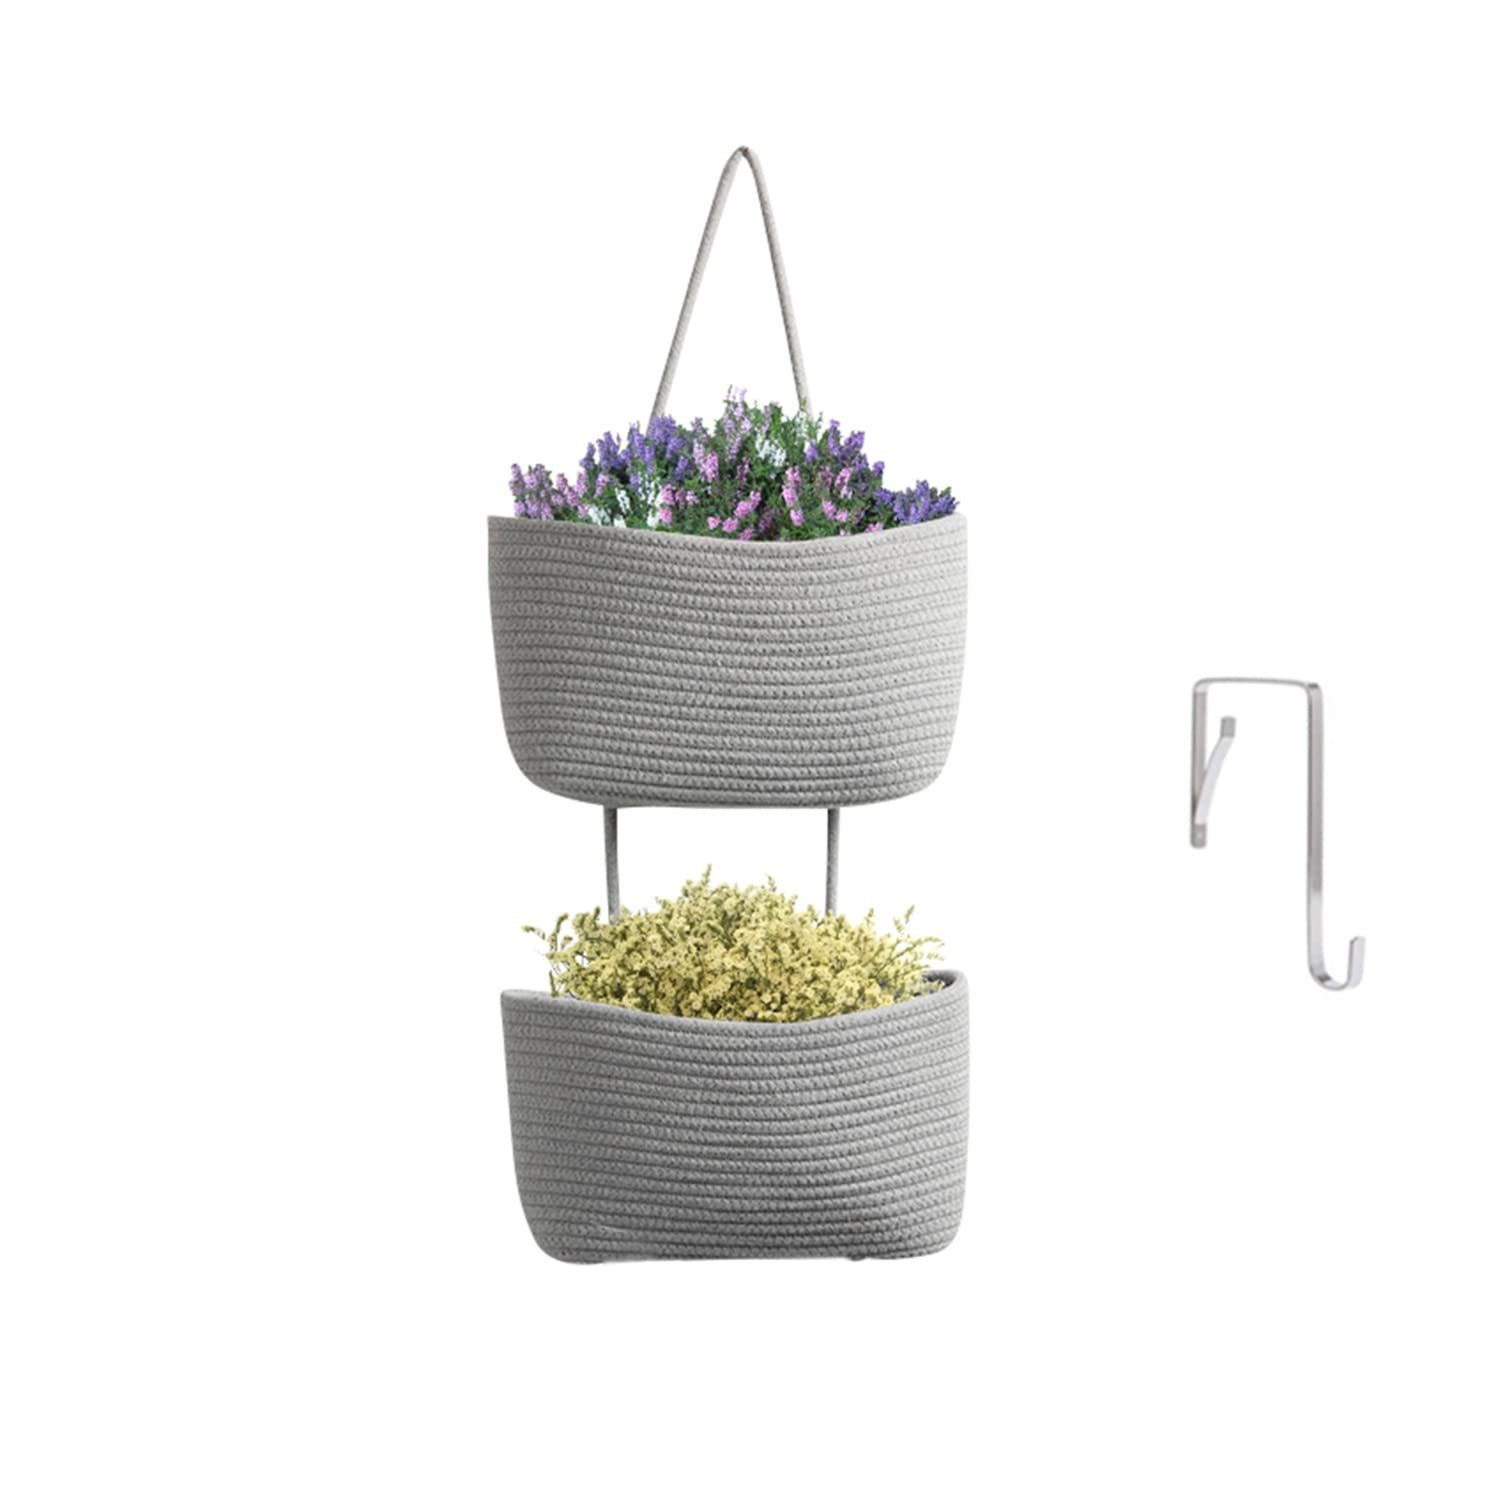 Primary image for Over The Door Hanging Basket, Woven Cotton Baby Nursery Storage, 3-Tier Wall-Mou